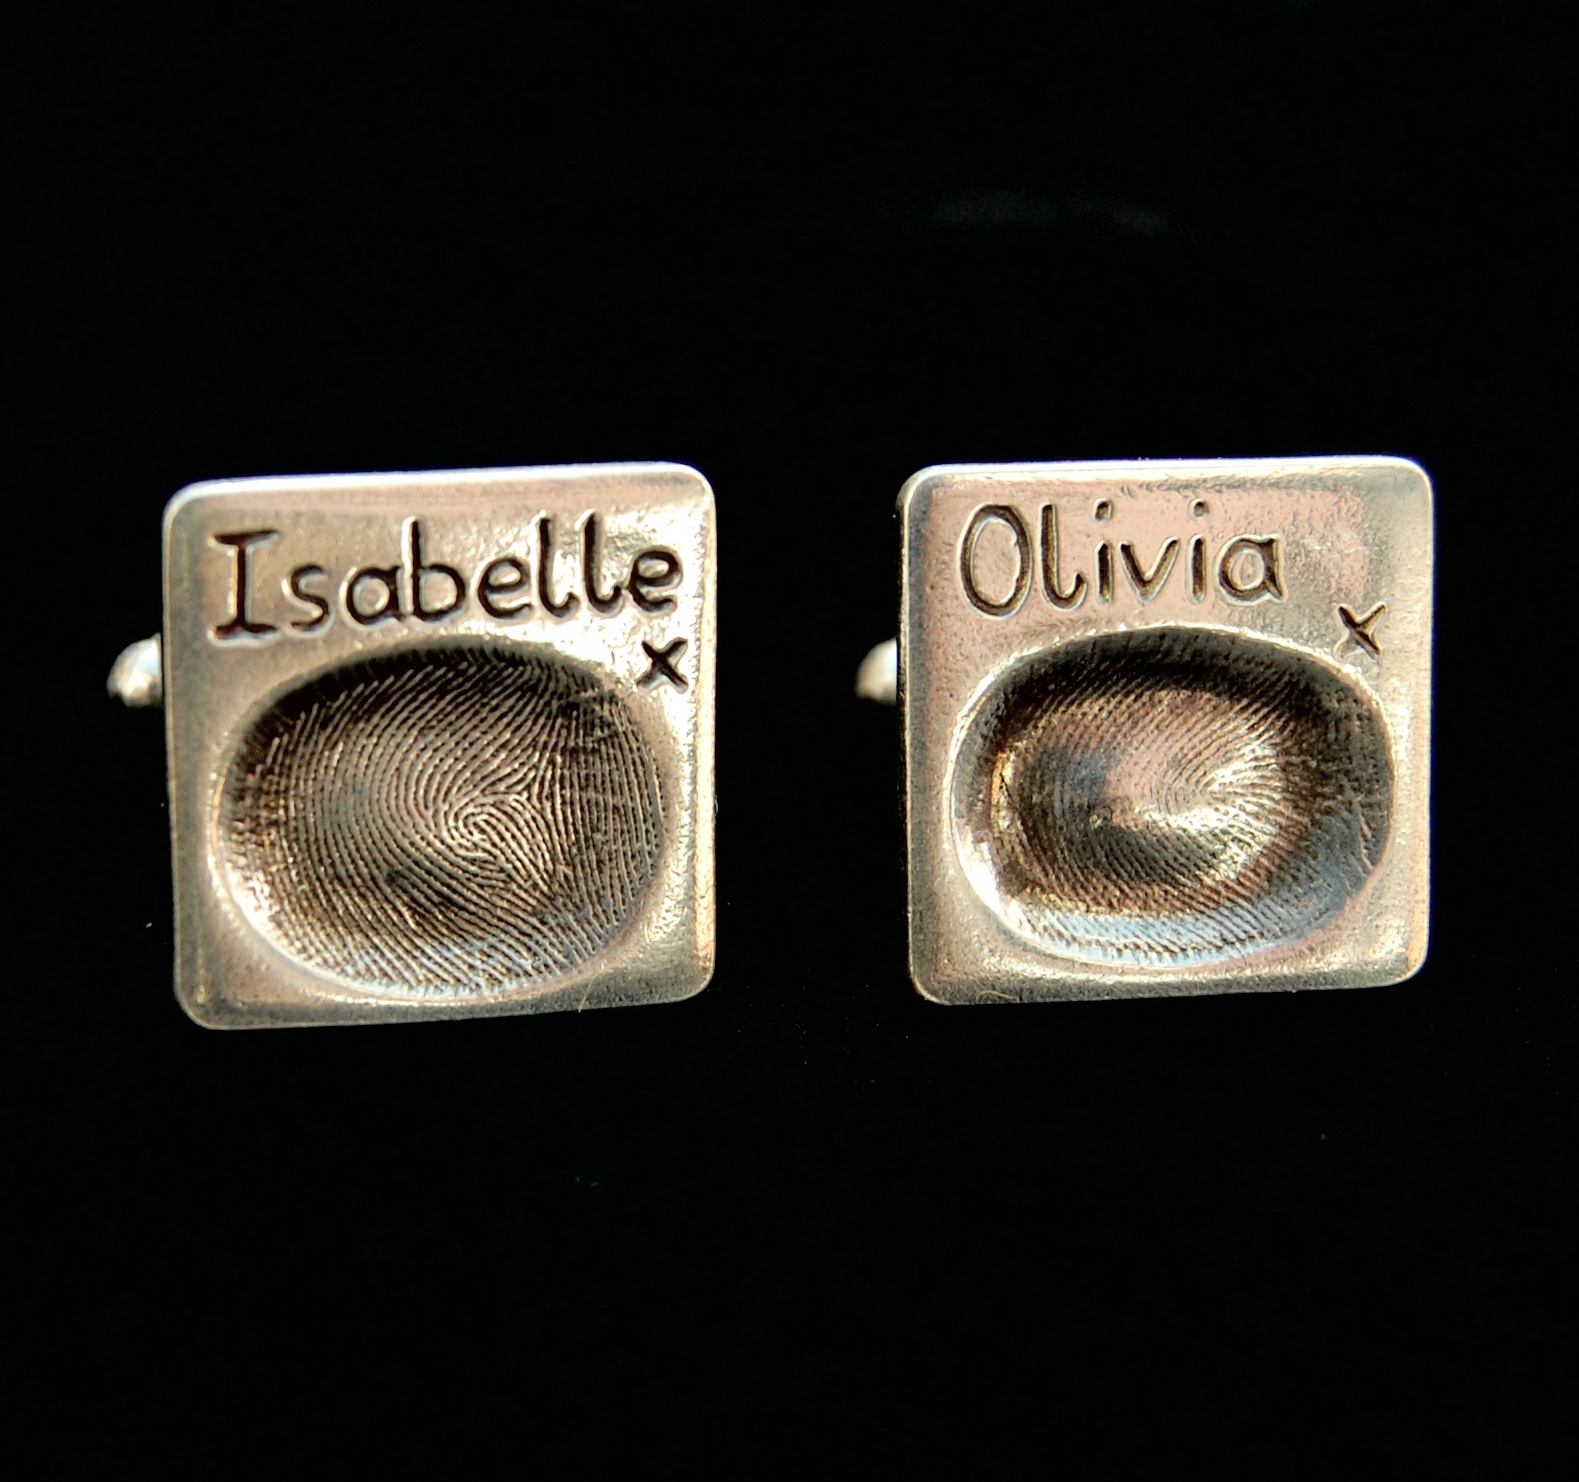 Square shaped silver fingerprint cufflinks with names hand inscribed above the prints.